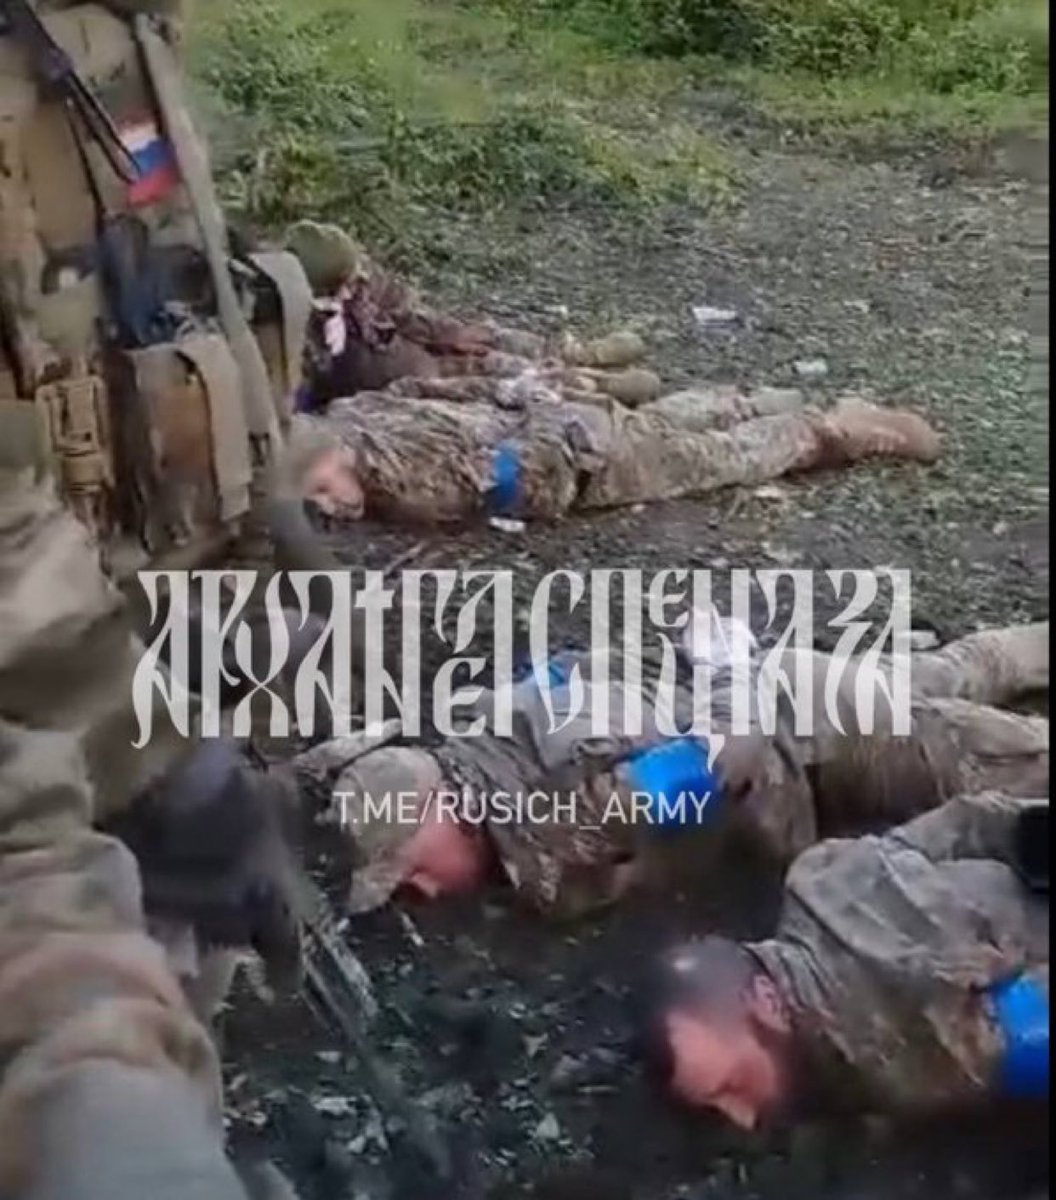 These Ukrainian soldiers walked toward the Russian lines with a white flag. They had enough of the suicide missions, it is believed. 

As prisoner, their life is safe.